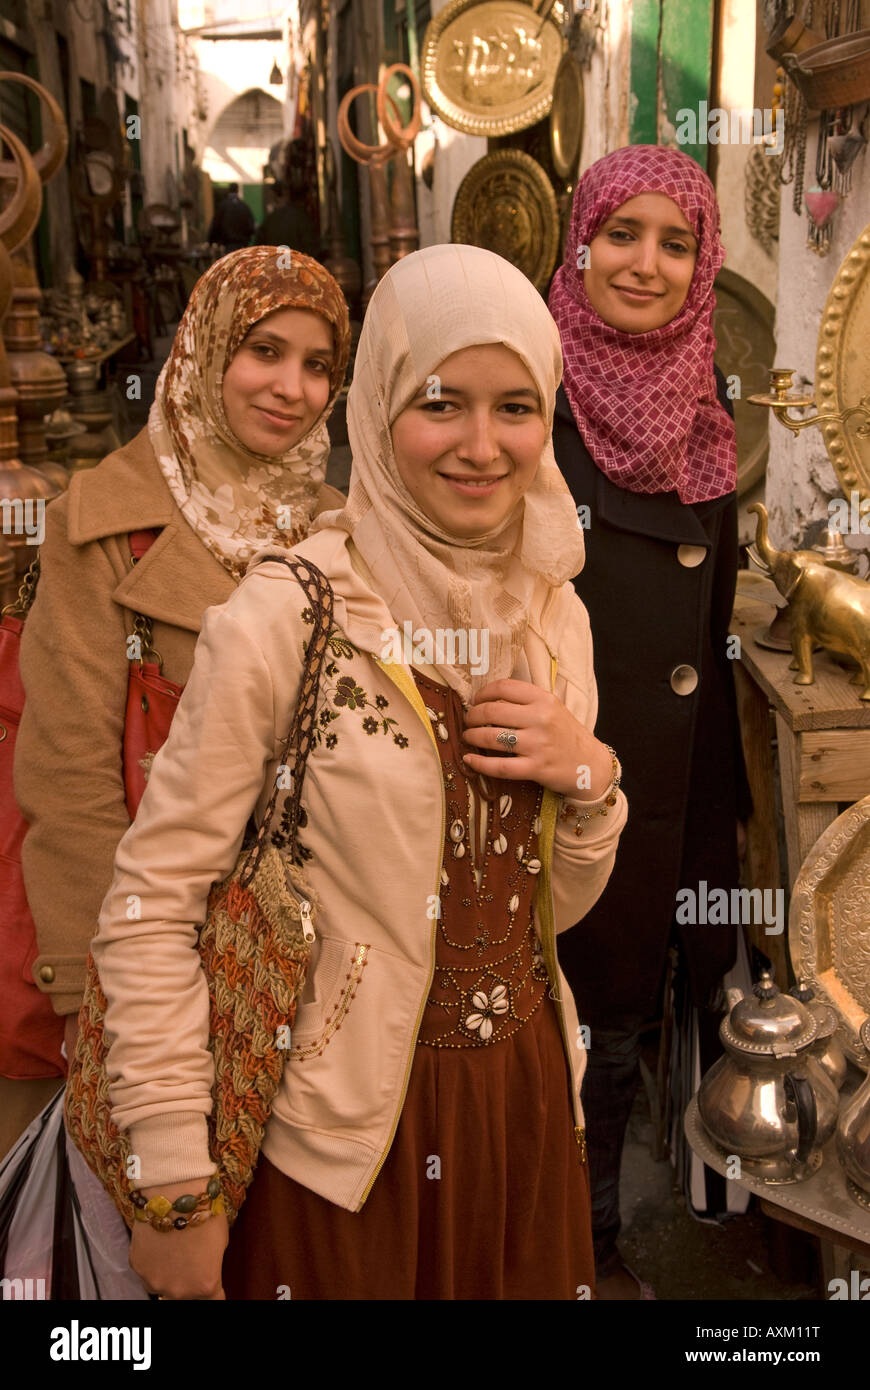 Three young Libyan women in the copper souk of the old town or medina, Tripoli, Libya. Stock Photo